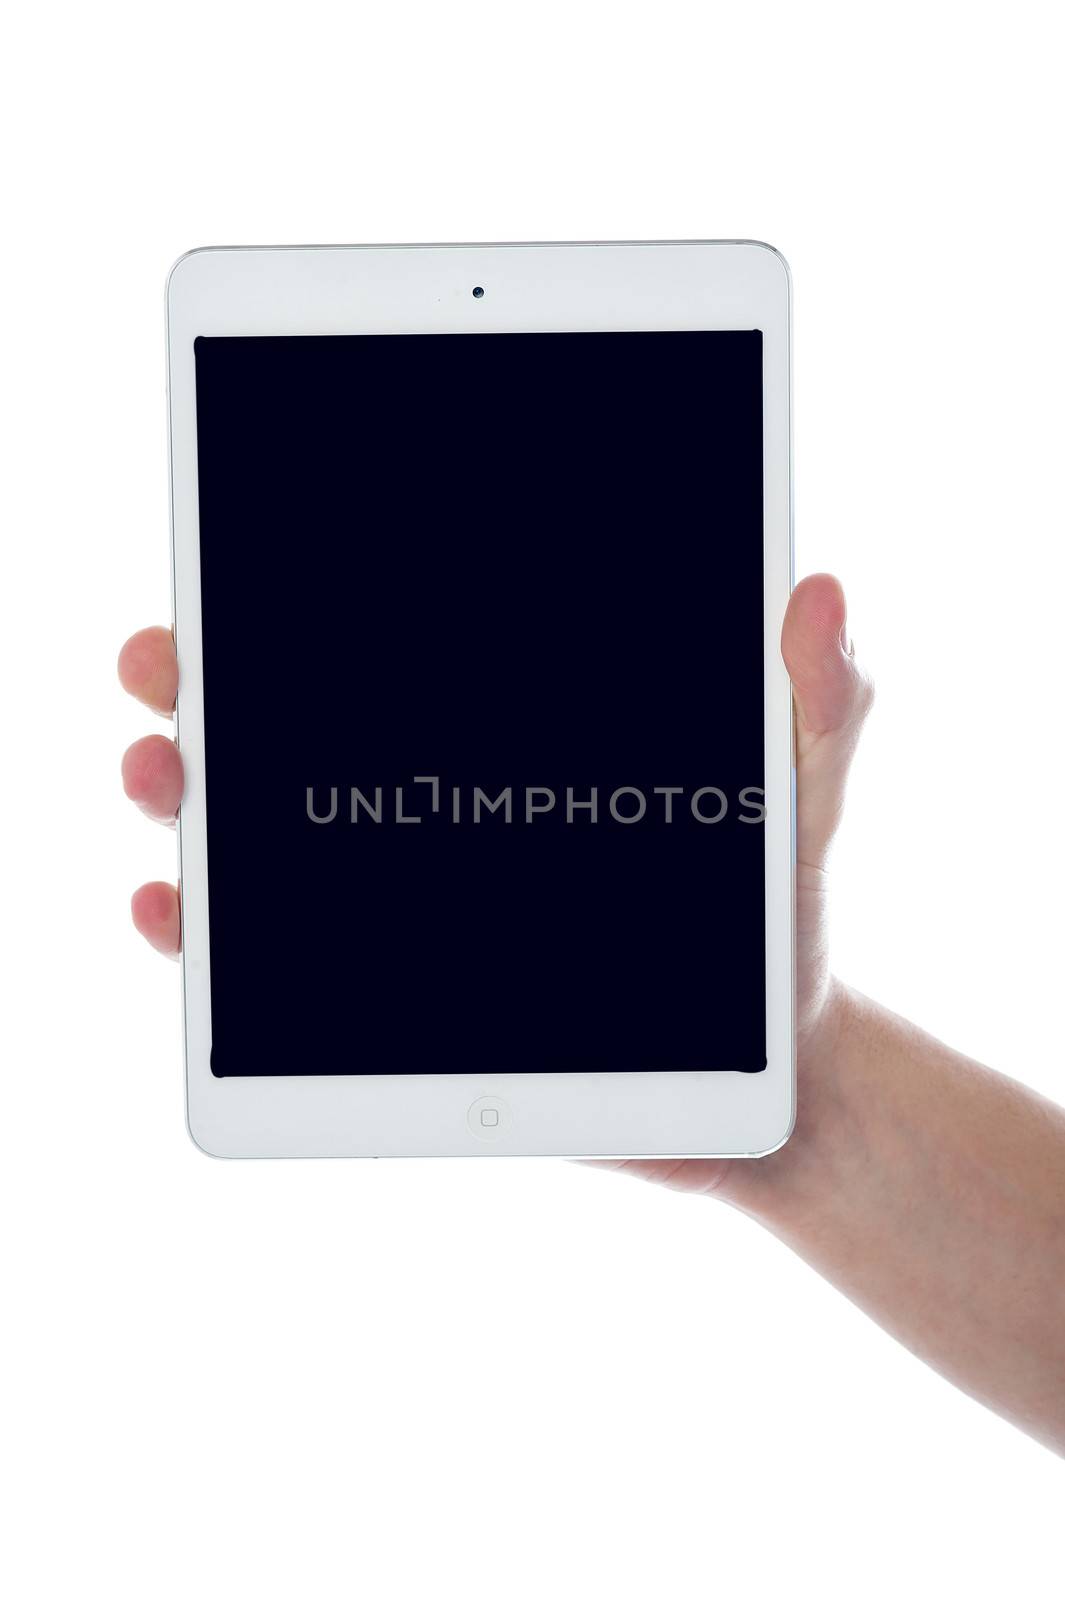 Image of newly launched tablet device